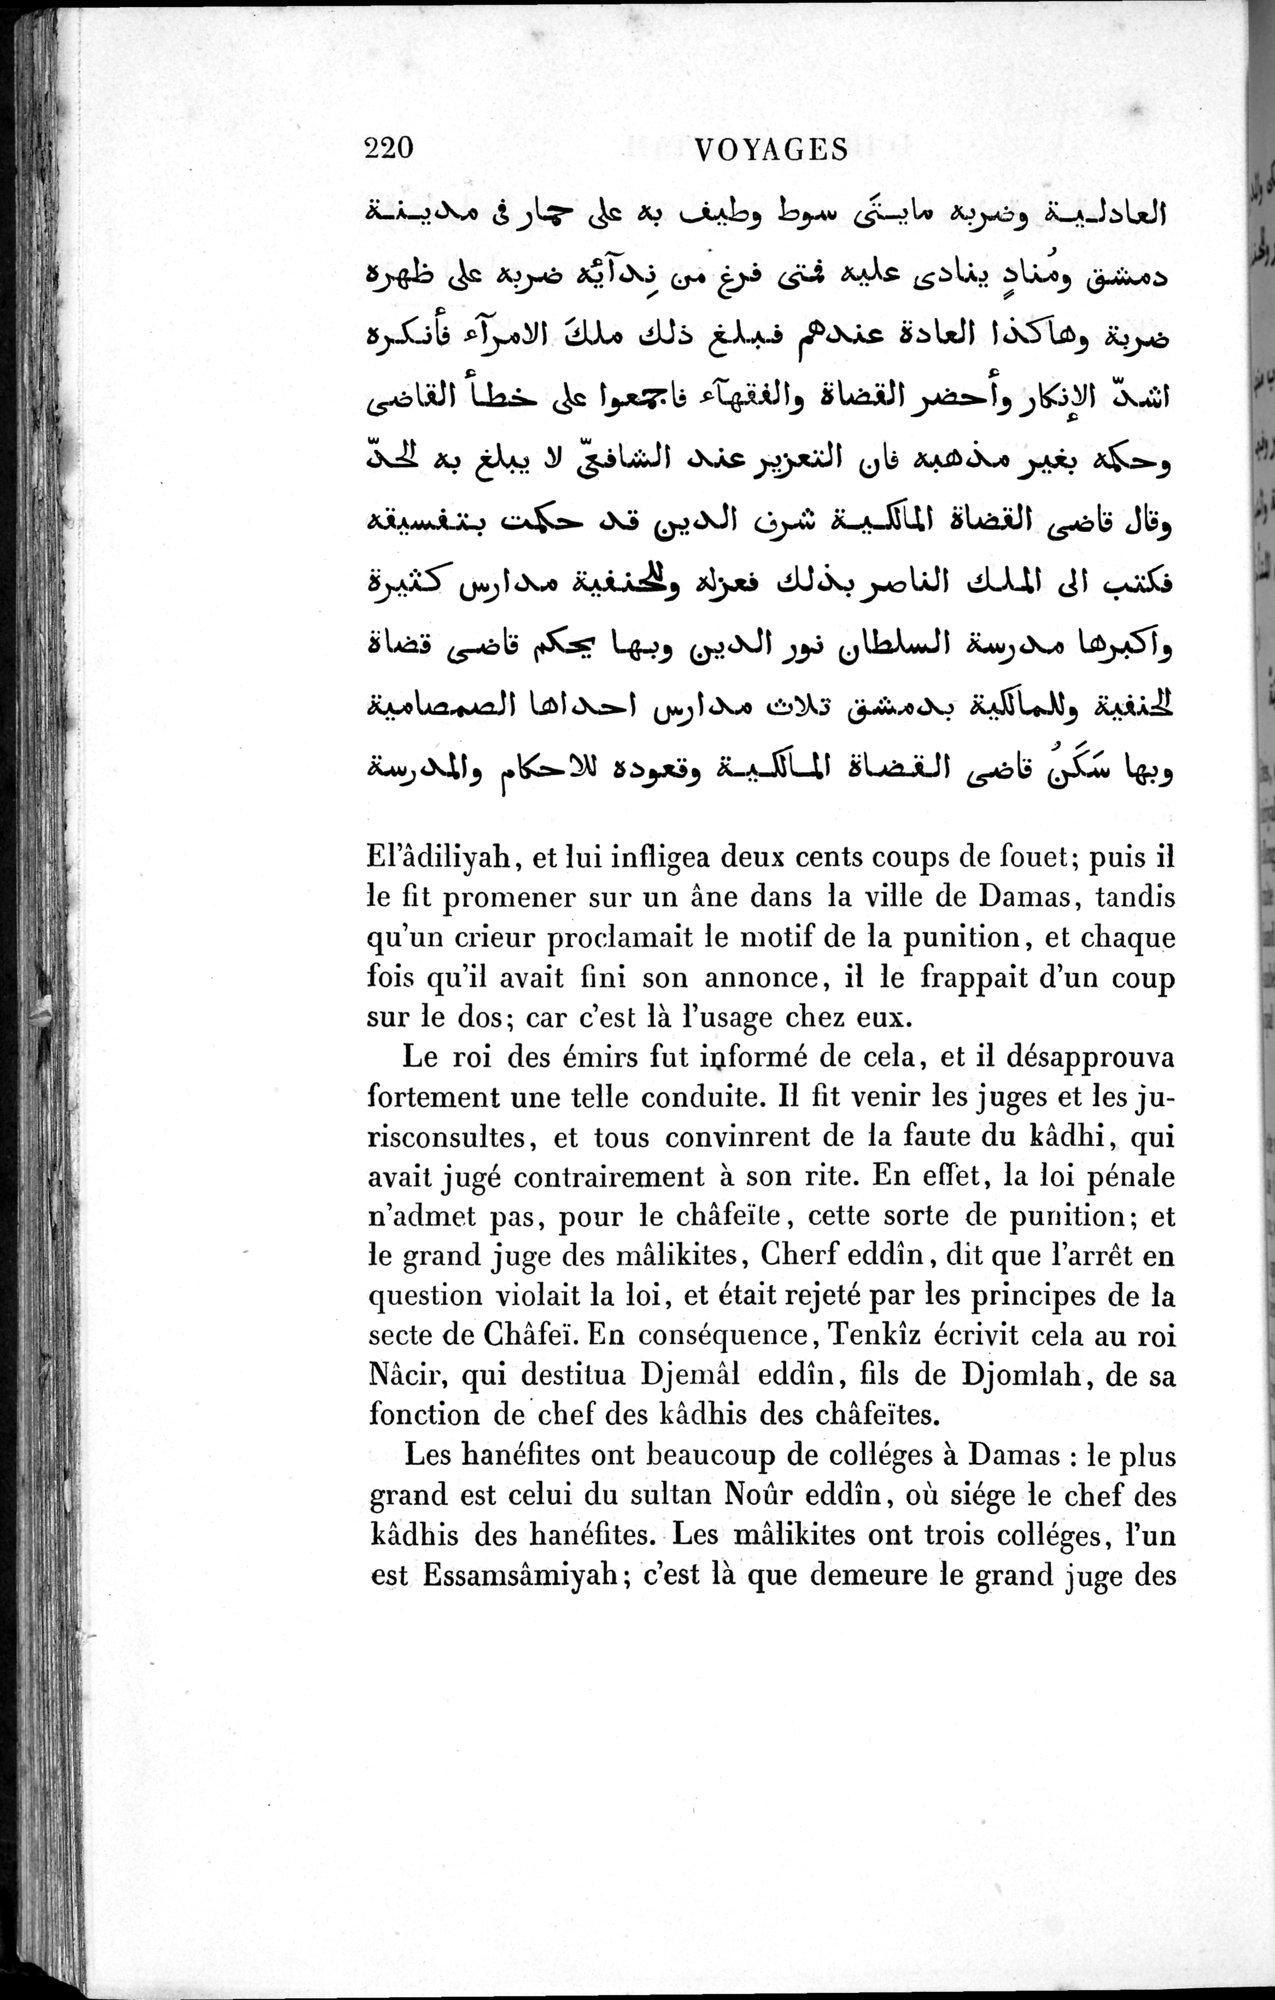 Voyages d'Ibn Batoutah : vol.1 / Page 280 (Grayscale High Resolution Image)